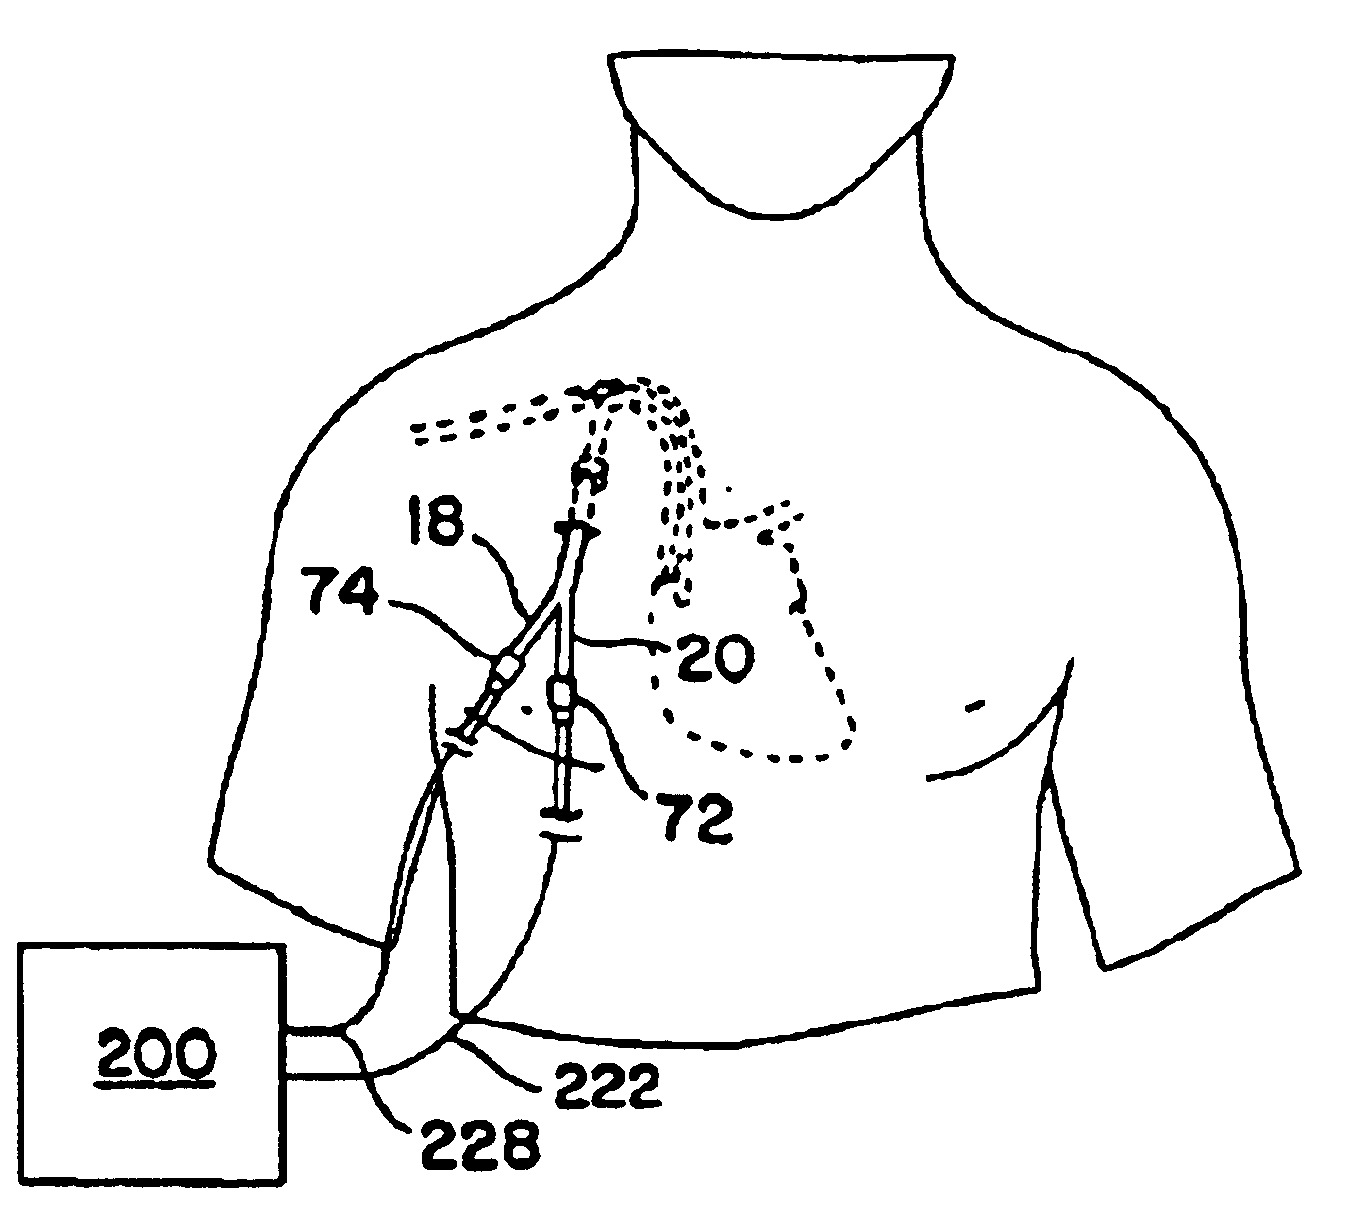 Double-y-shaped multi-lumen catheter with selectively attachable hubs